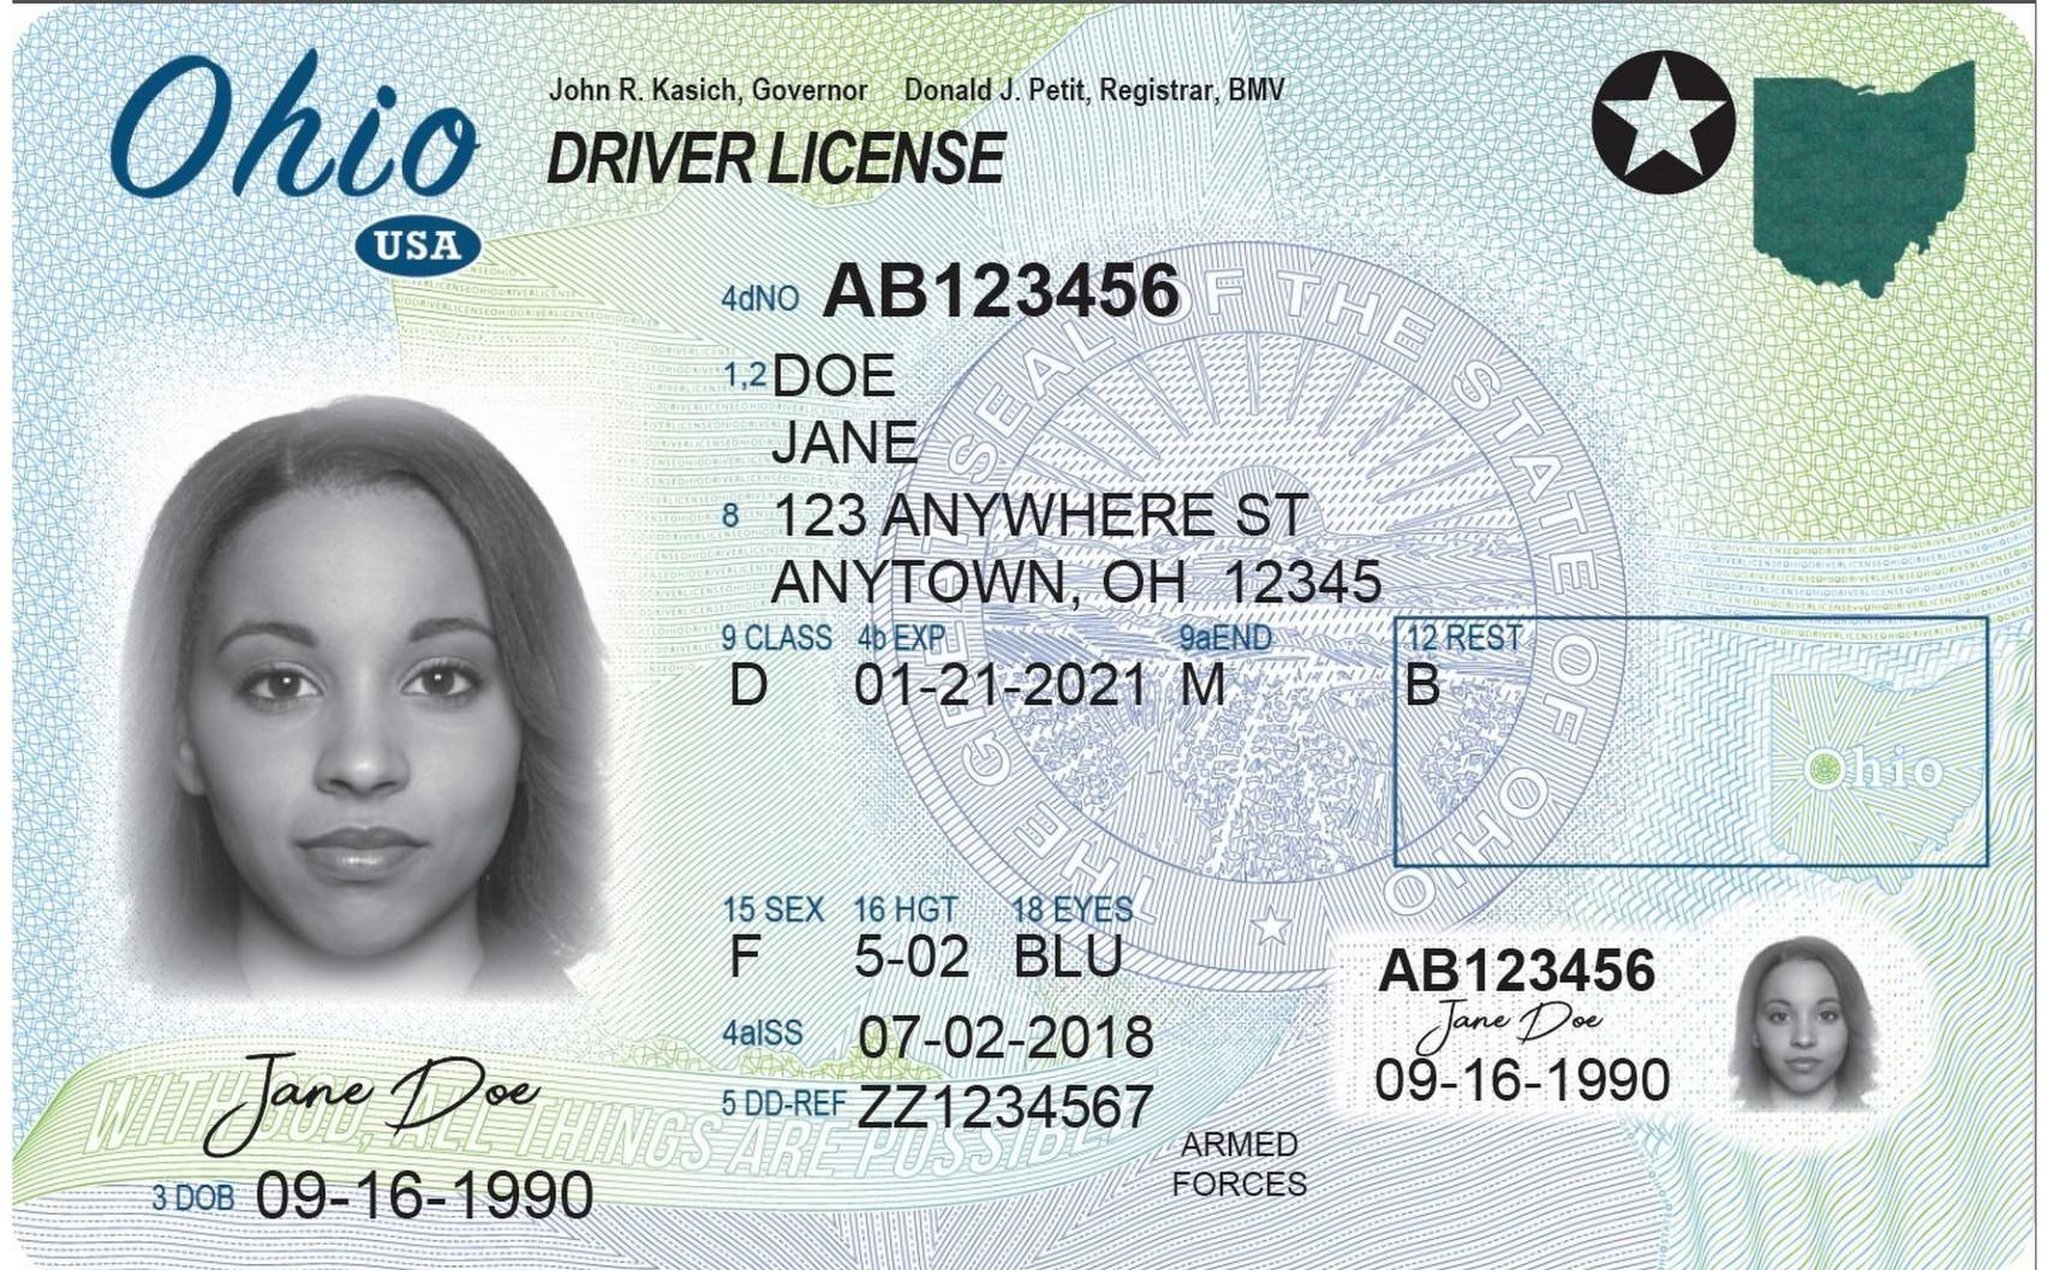 Explainer: What does it take to get an Ohio driver's license?